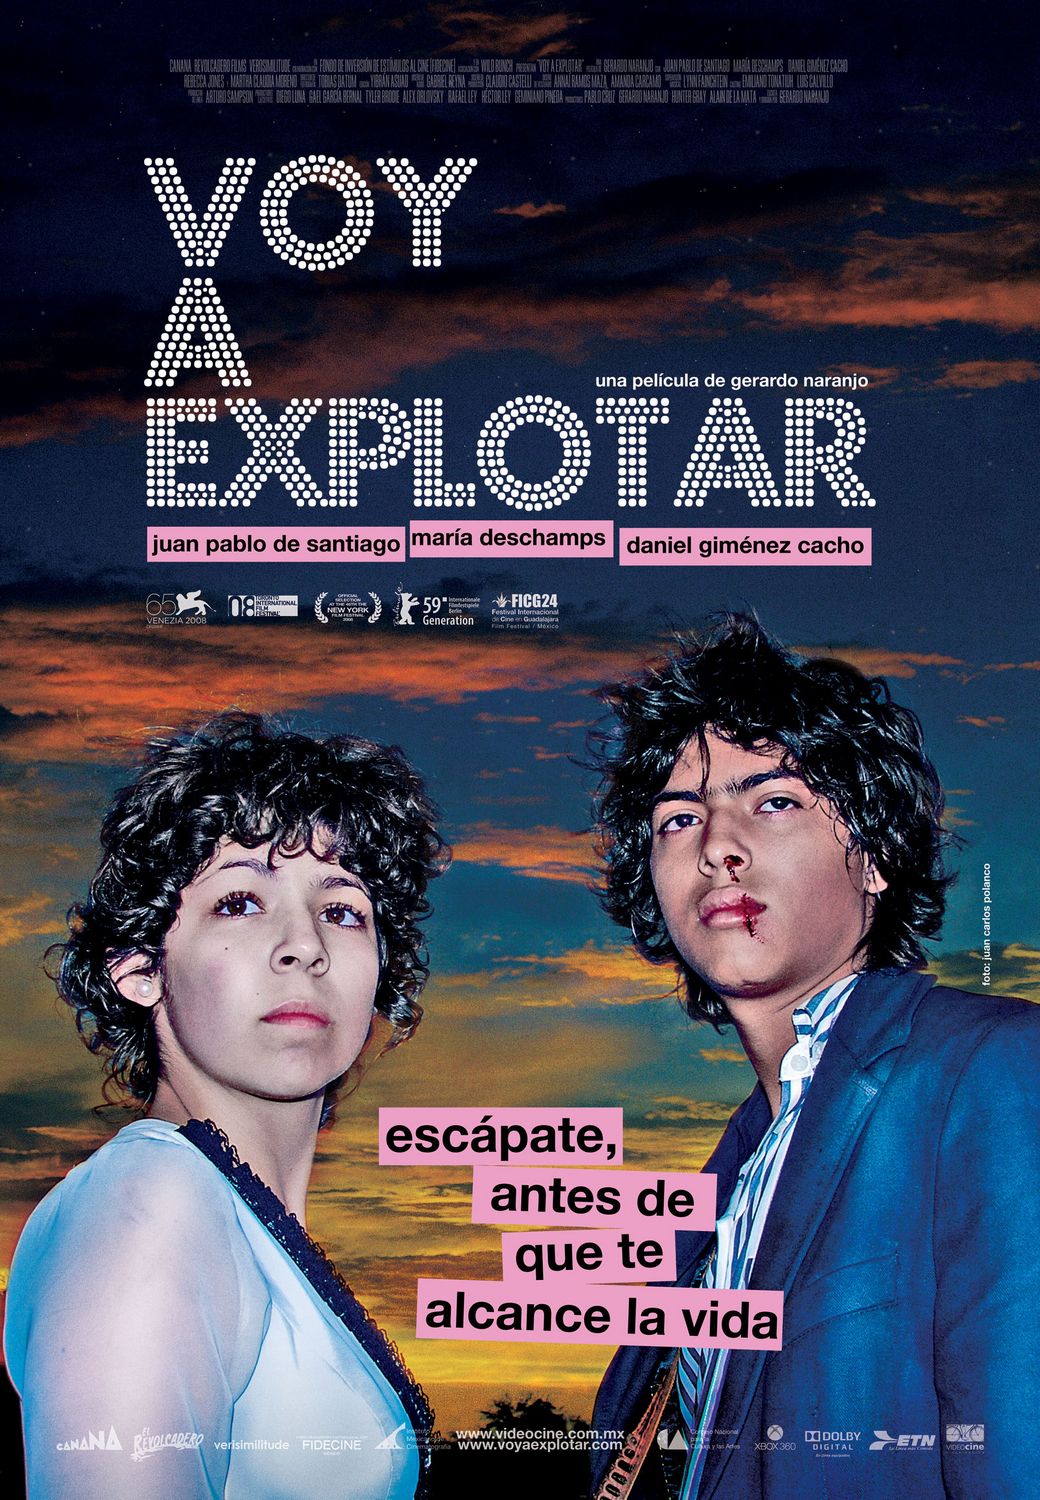 Extra Large Movie Poster Image for Voy a explotar (#1 of 5)